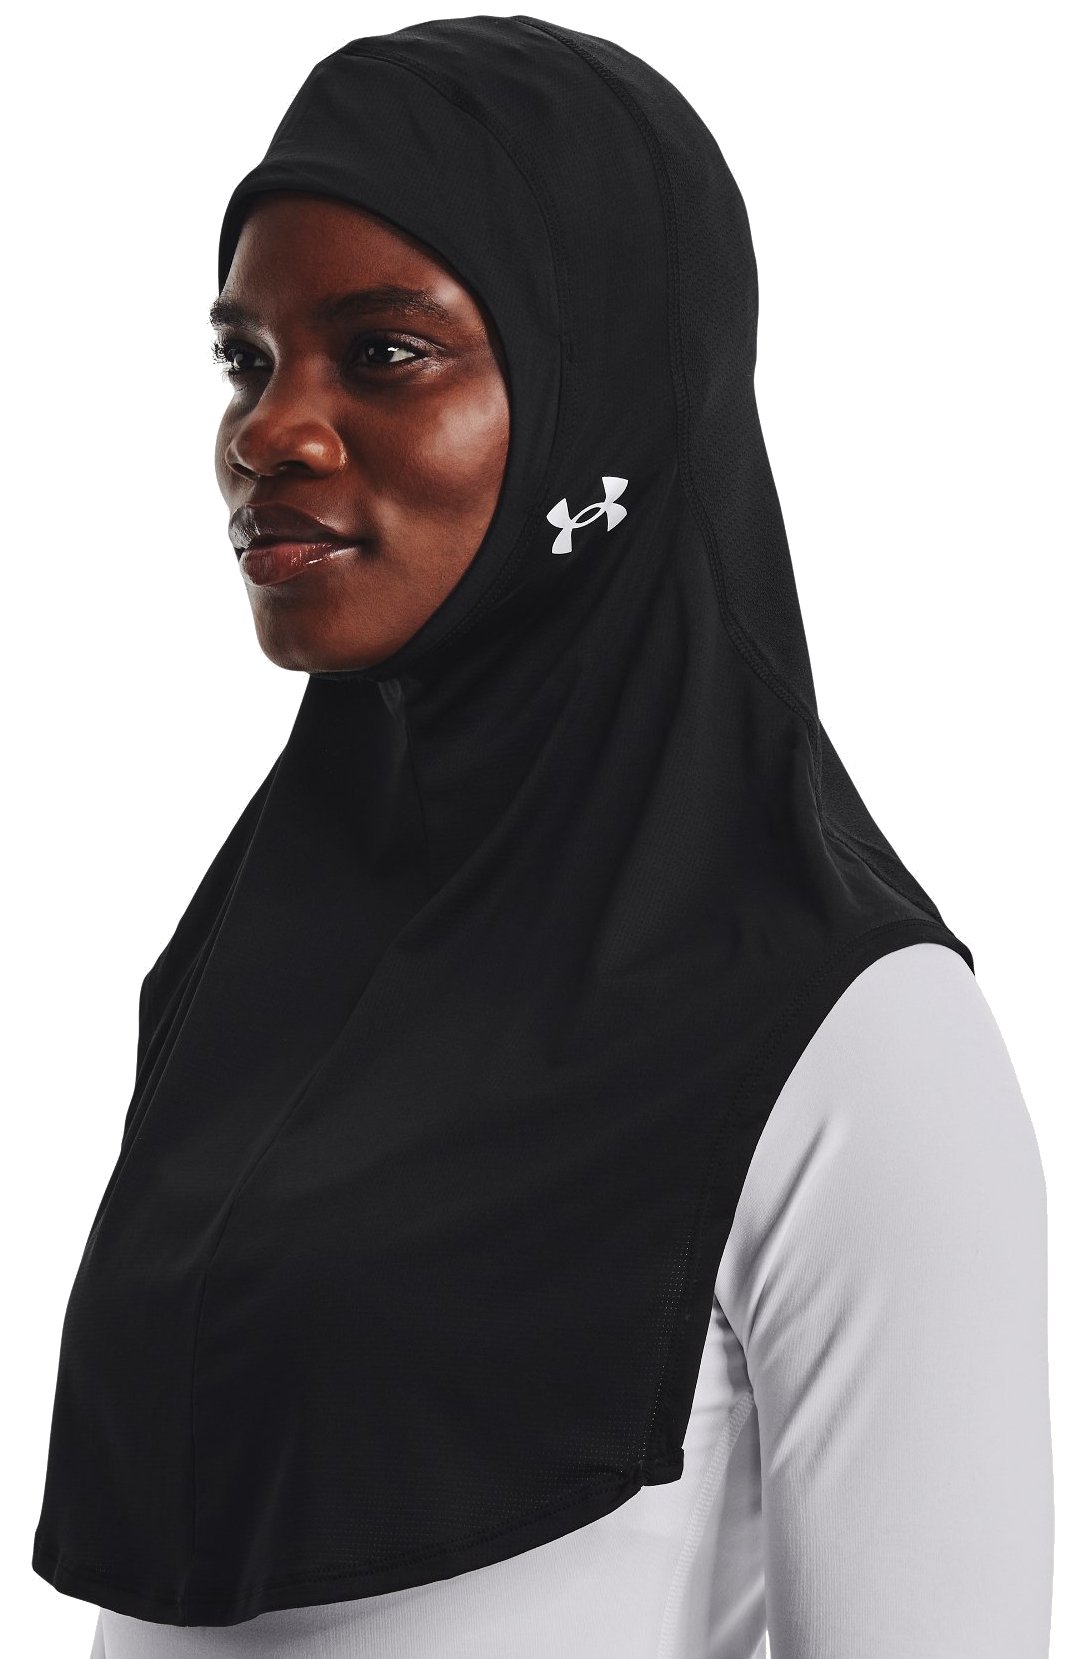 Extended Sport Hijab